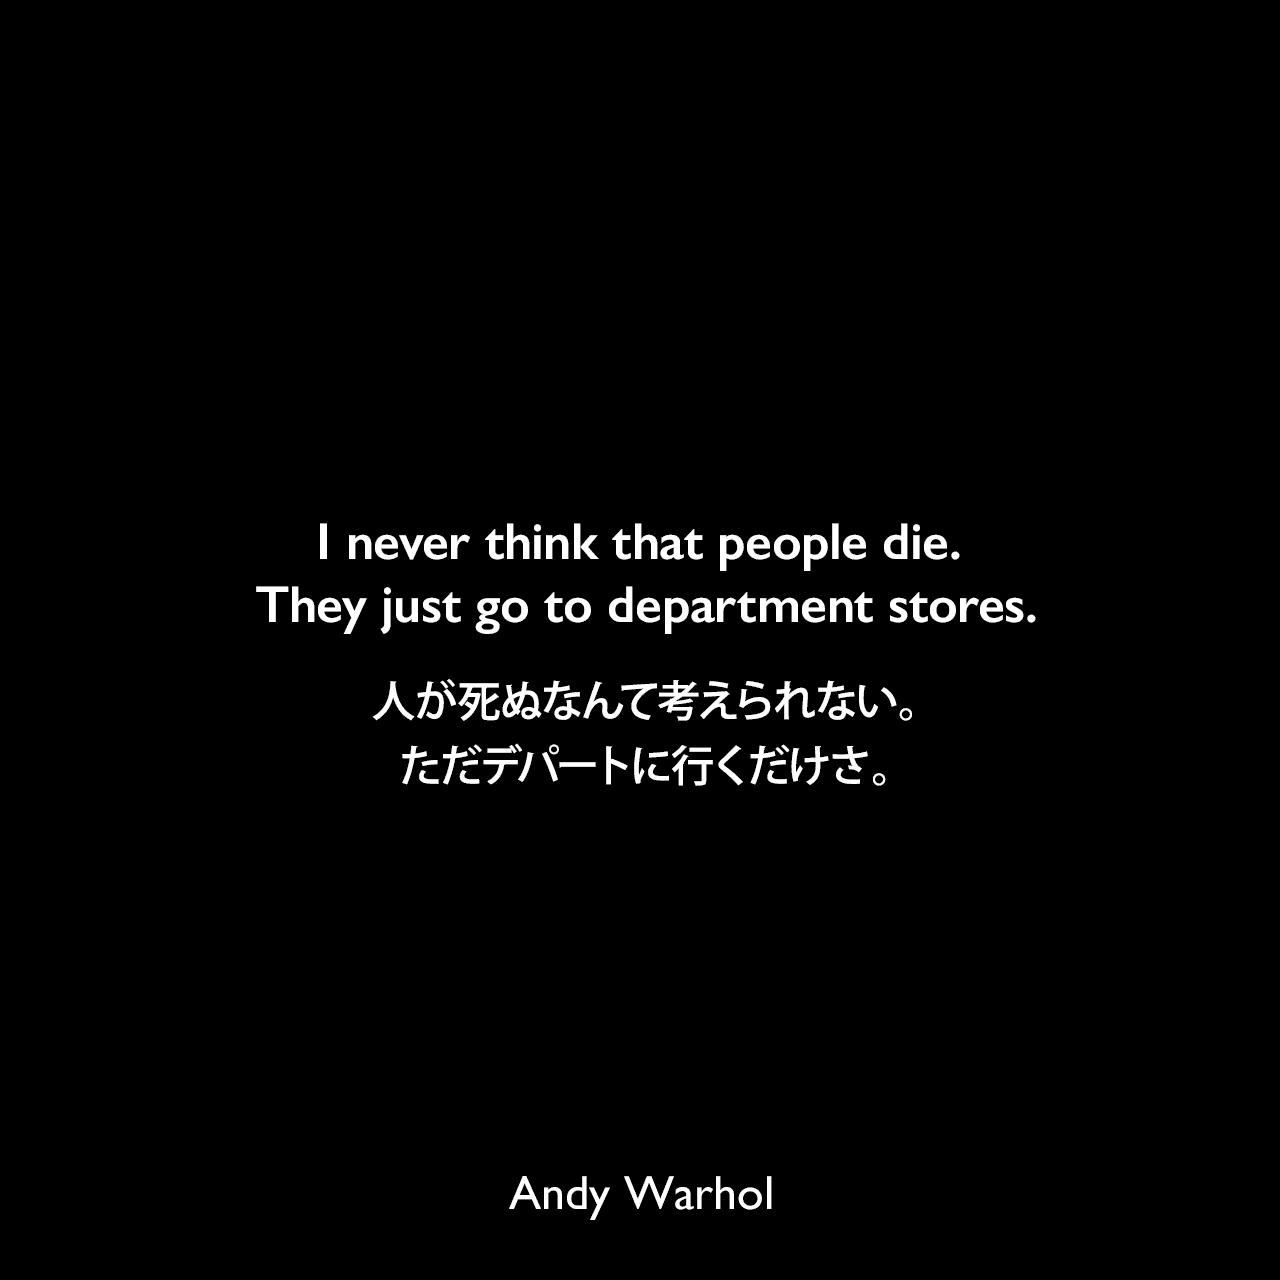 I never think that people die. They just go to department stores.人が死ぬなんて考えられない。ただデパートに行くだけさ。Andy Warhol